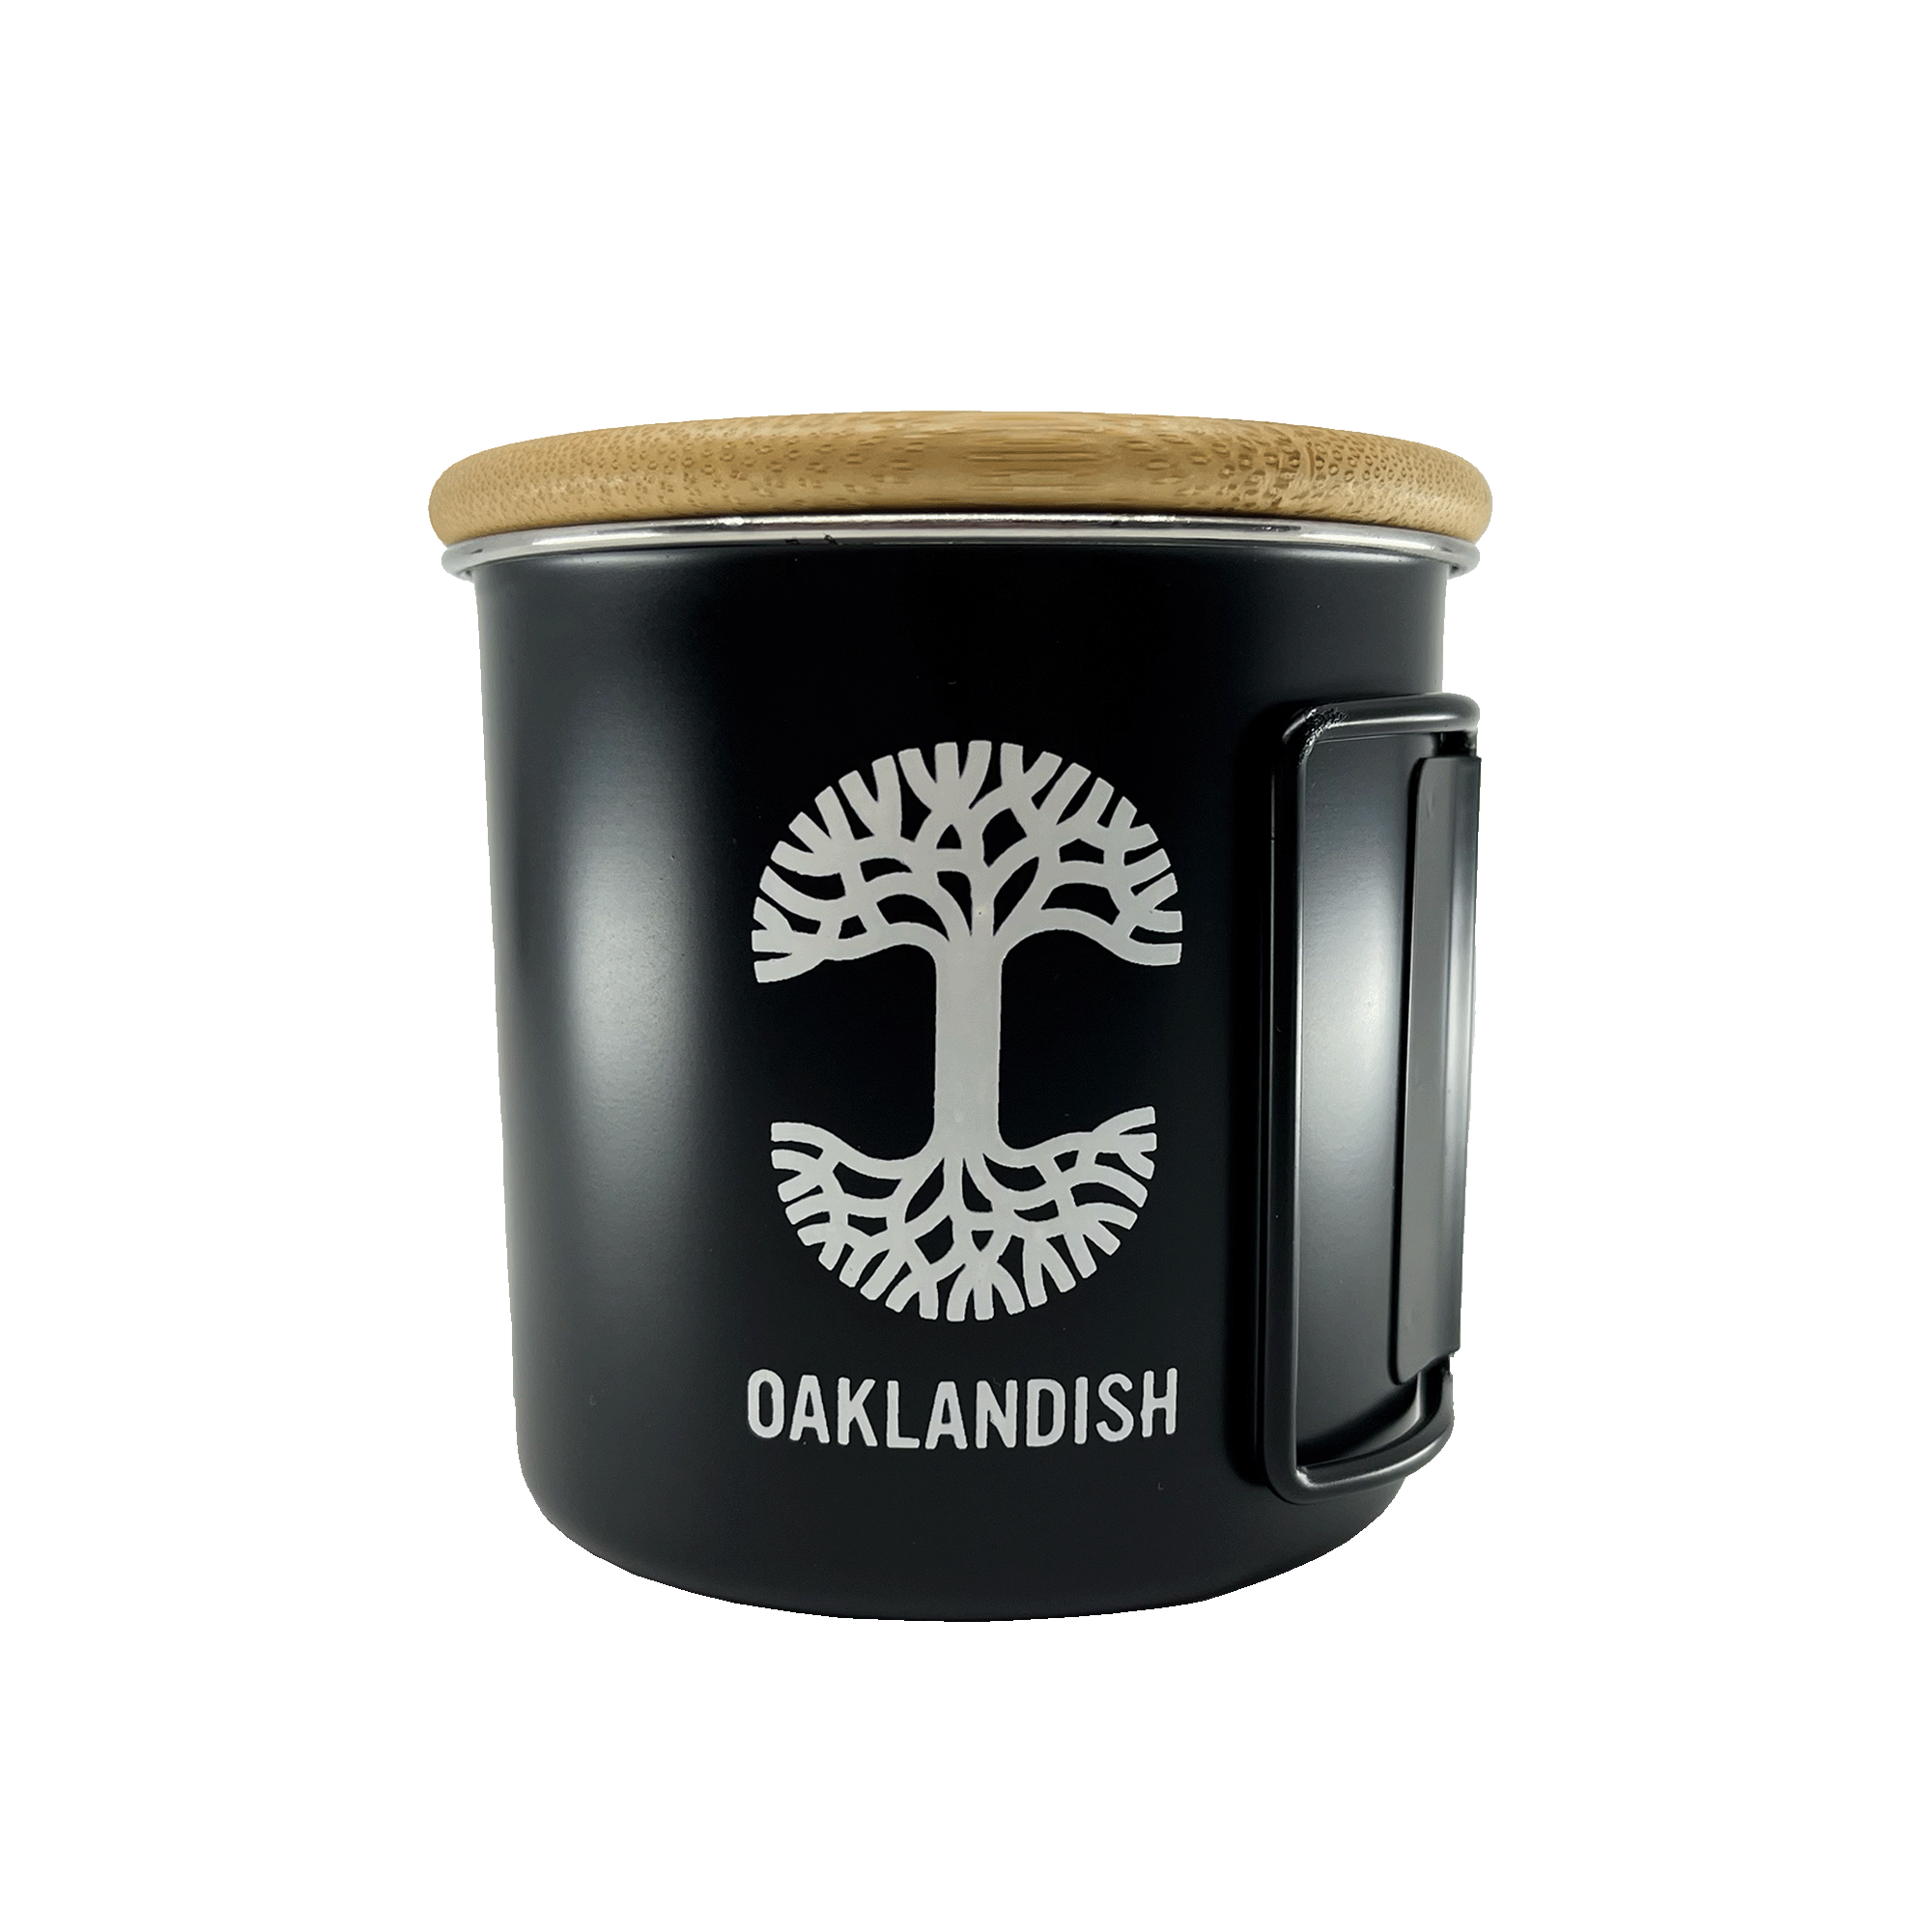 Black stainless steel camp mug with collapsable handle, wood lid, and large white Oaklandish tree logo and wordmark.